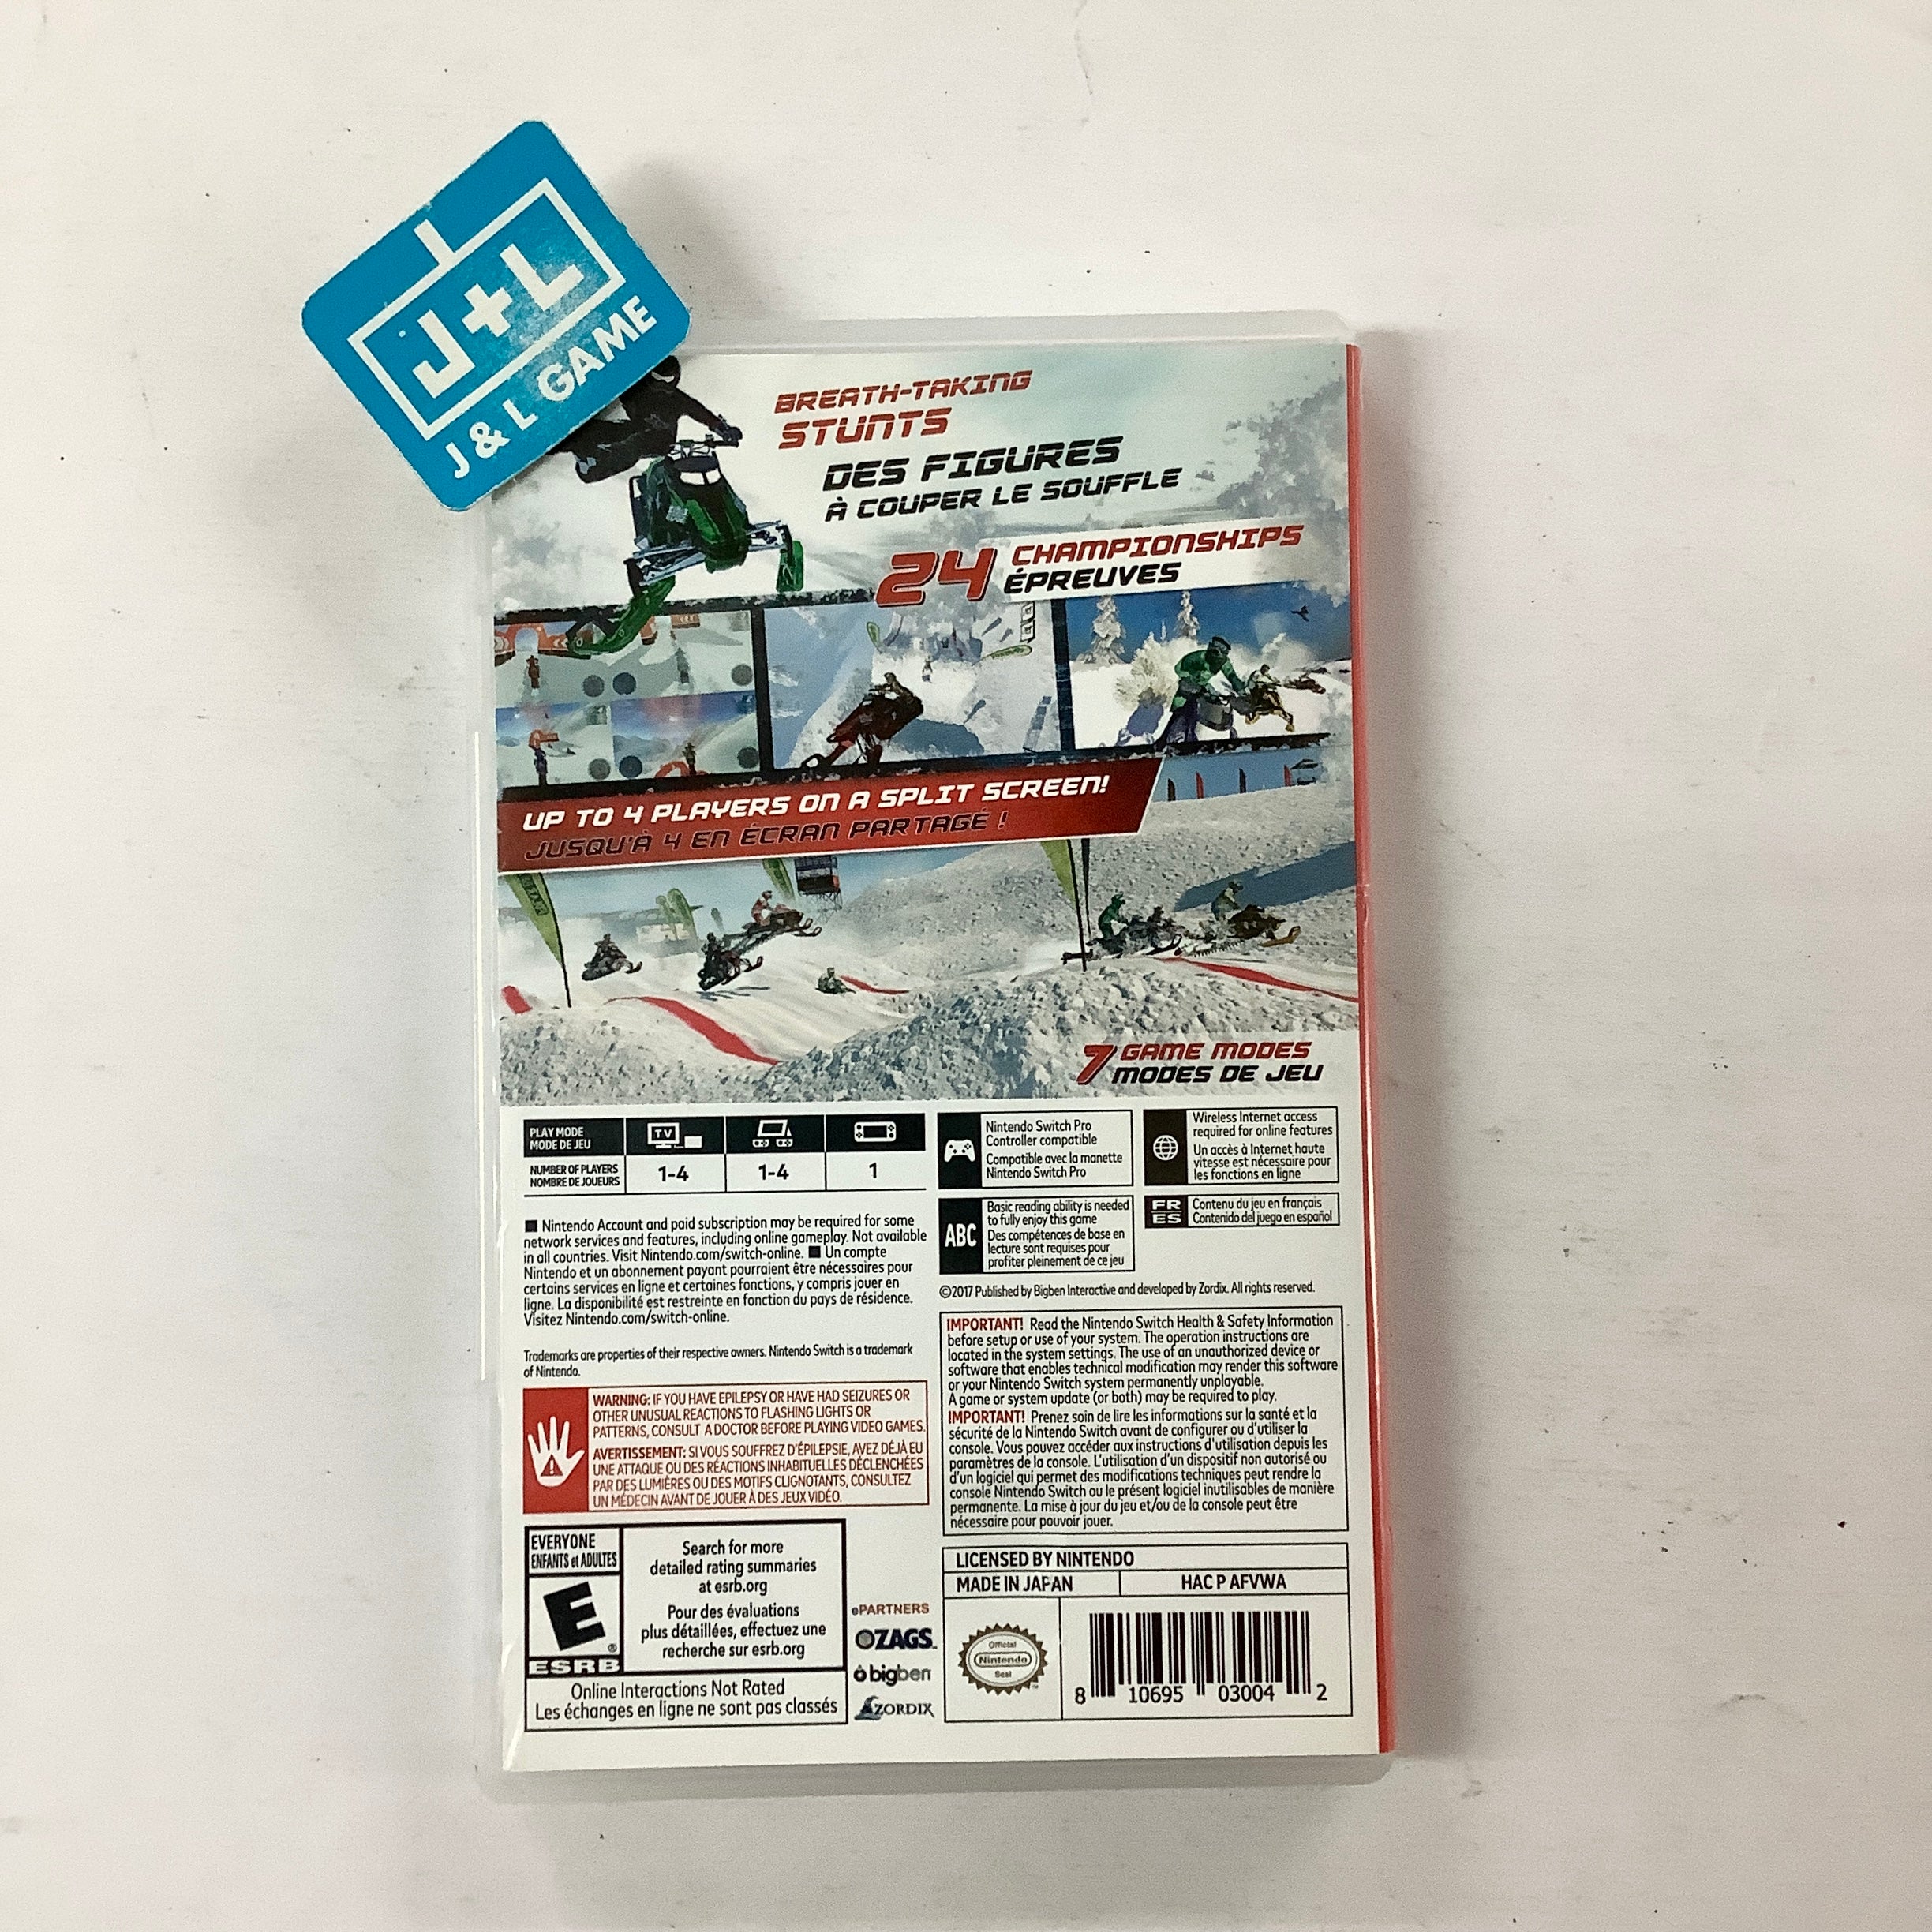 Snow Moto Racing Freedom - (NSW) Nintendo Switch [Pre-Owned] Video Games Bigben Interactive   